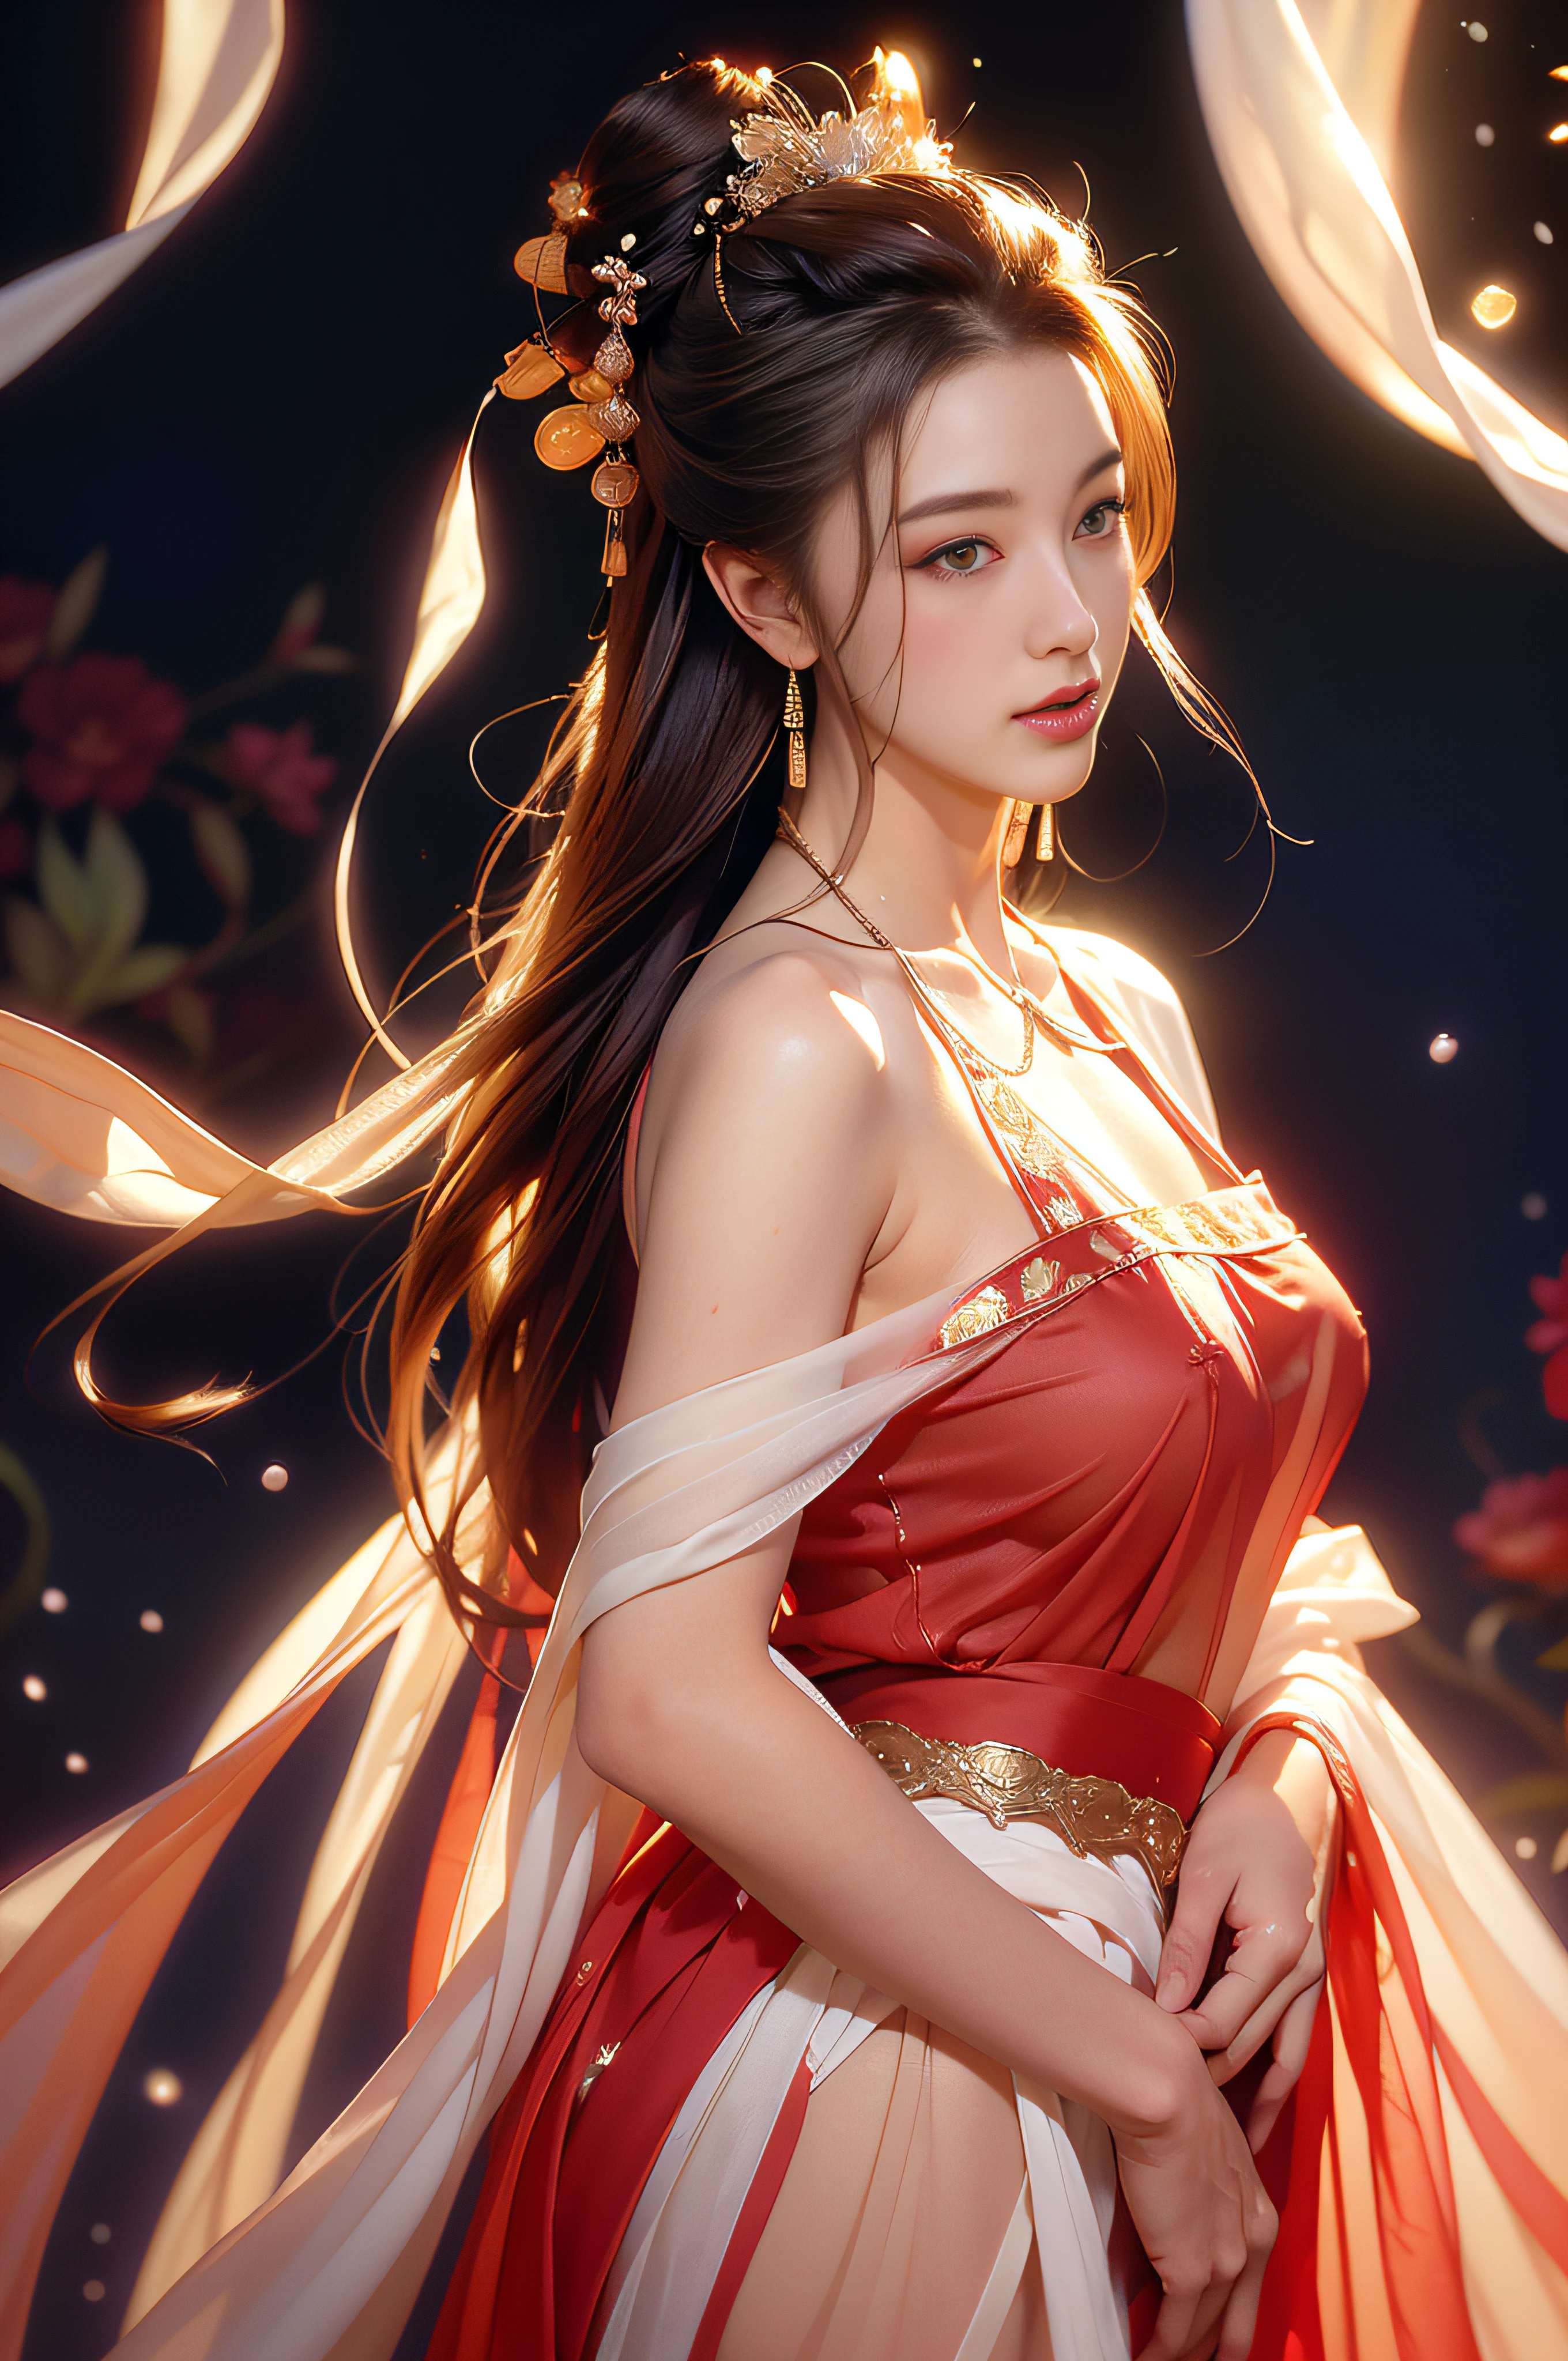 Gilded Chinese Palace,looki at viewer,depth of fields,bokeh dof,light falling,((A MILF))、pregnant woman、Red dress
Transparent underwear、one-girl、Red shirt、a black skirt、huge-breasted、
with brown eye、(long whitr hair、brunette color hair、Very straight hair:1.4、hime-cut:1.4)、earrings necklace、pouty、
A picture、tmasterpiece、top-quality、NFFSW、A high resolution、realistic detail、glistning skin、Mature figure、Plump body、crisp breasts、perfect bodies、wide waist、extremely colorful、looking at viewert、hyper realisitc、From the front side、watercolor paiting、Traditional media、(color difference、intricately details)、dynamicposes、dynamic ungle、
40k、NFFSW、A high resolution、From the angle from below、ancient Chinese costume、Ancient Chinese hairstyle、Upward hairstyle、The whole body is dressed in white silk cloth、（Close-up of raindrops in the air, Capture the world with raindrops, Distorted reflections, refracted light, The microscopic world inside each droplet, Miniature landscape, inverted image, Ethereal beauty, pause moments, translucent sphere, Distorted reality, Kaleidoscope view, Natural lenses, A glimpse of the moment, miniature world, Raindrop Symphony, Natural interoperability, 1girl in
, masutepiece, (Dynamic Angle:1.2)）